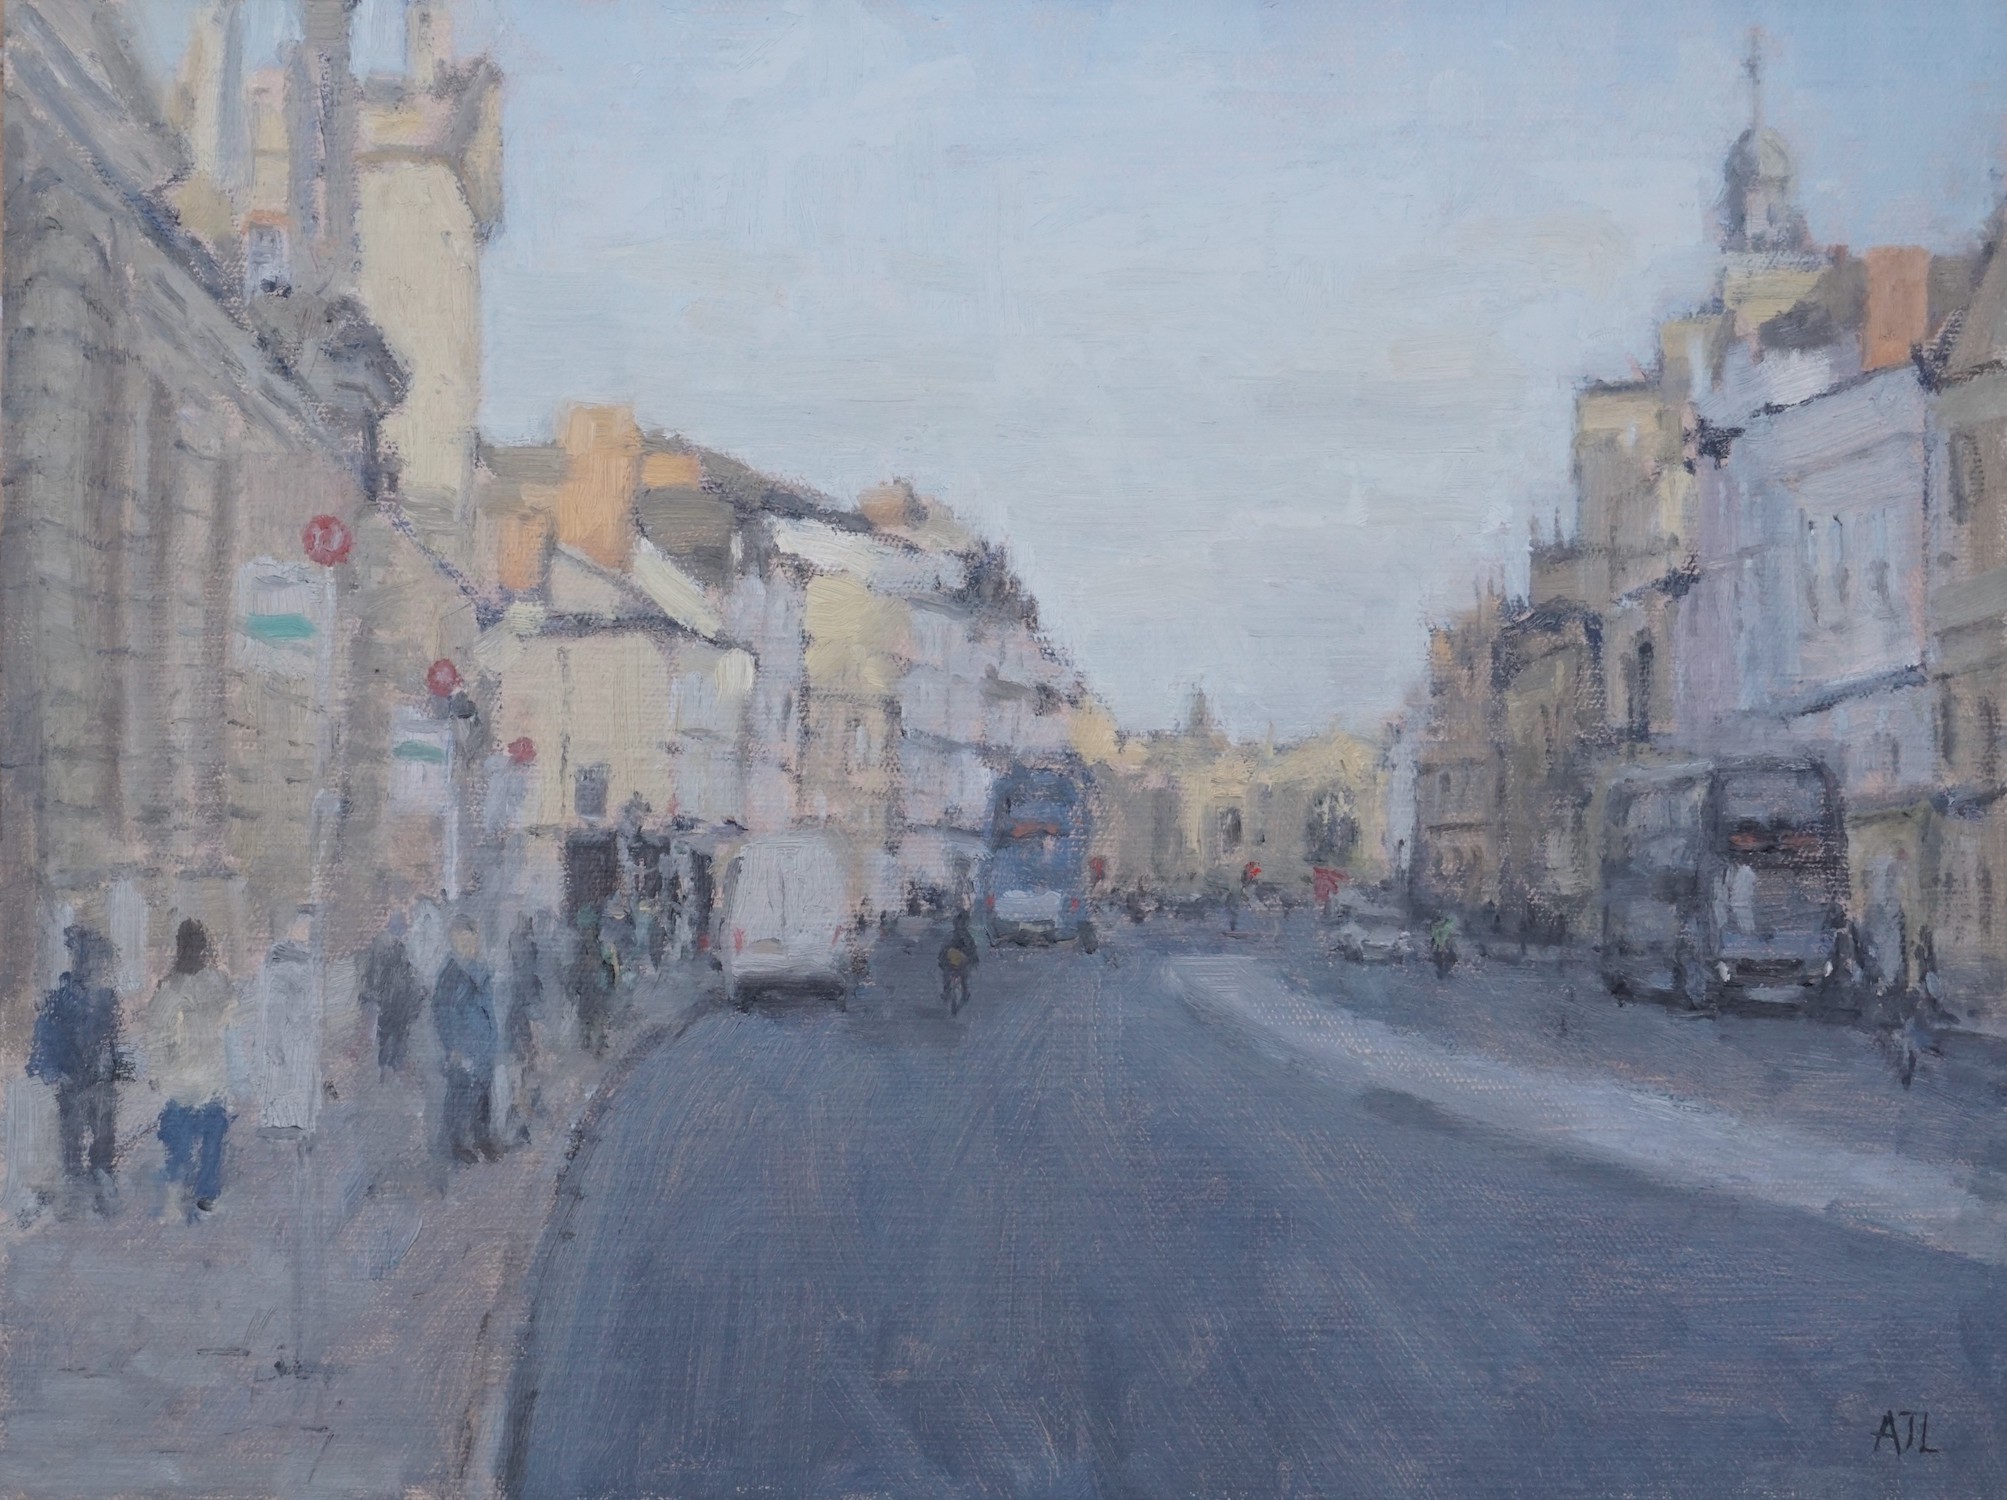 'Oxford High Street, Late Afternoon', Alex Long, Oil on linen board, 30 x 40 cm